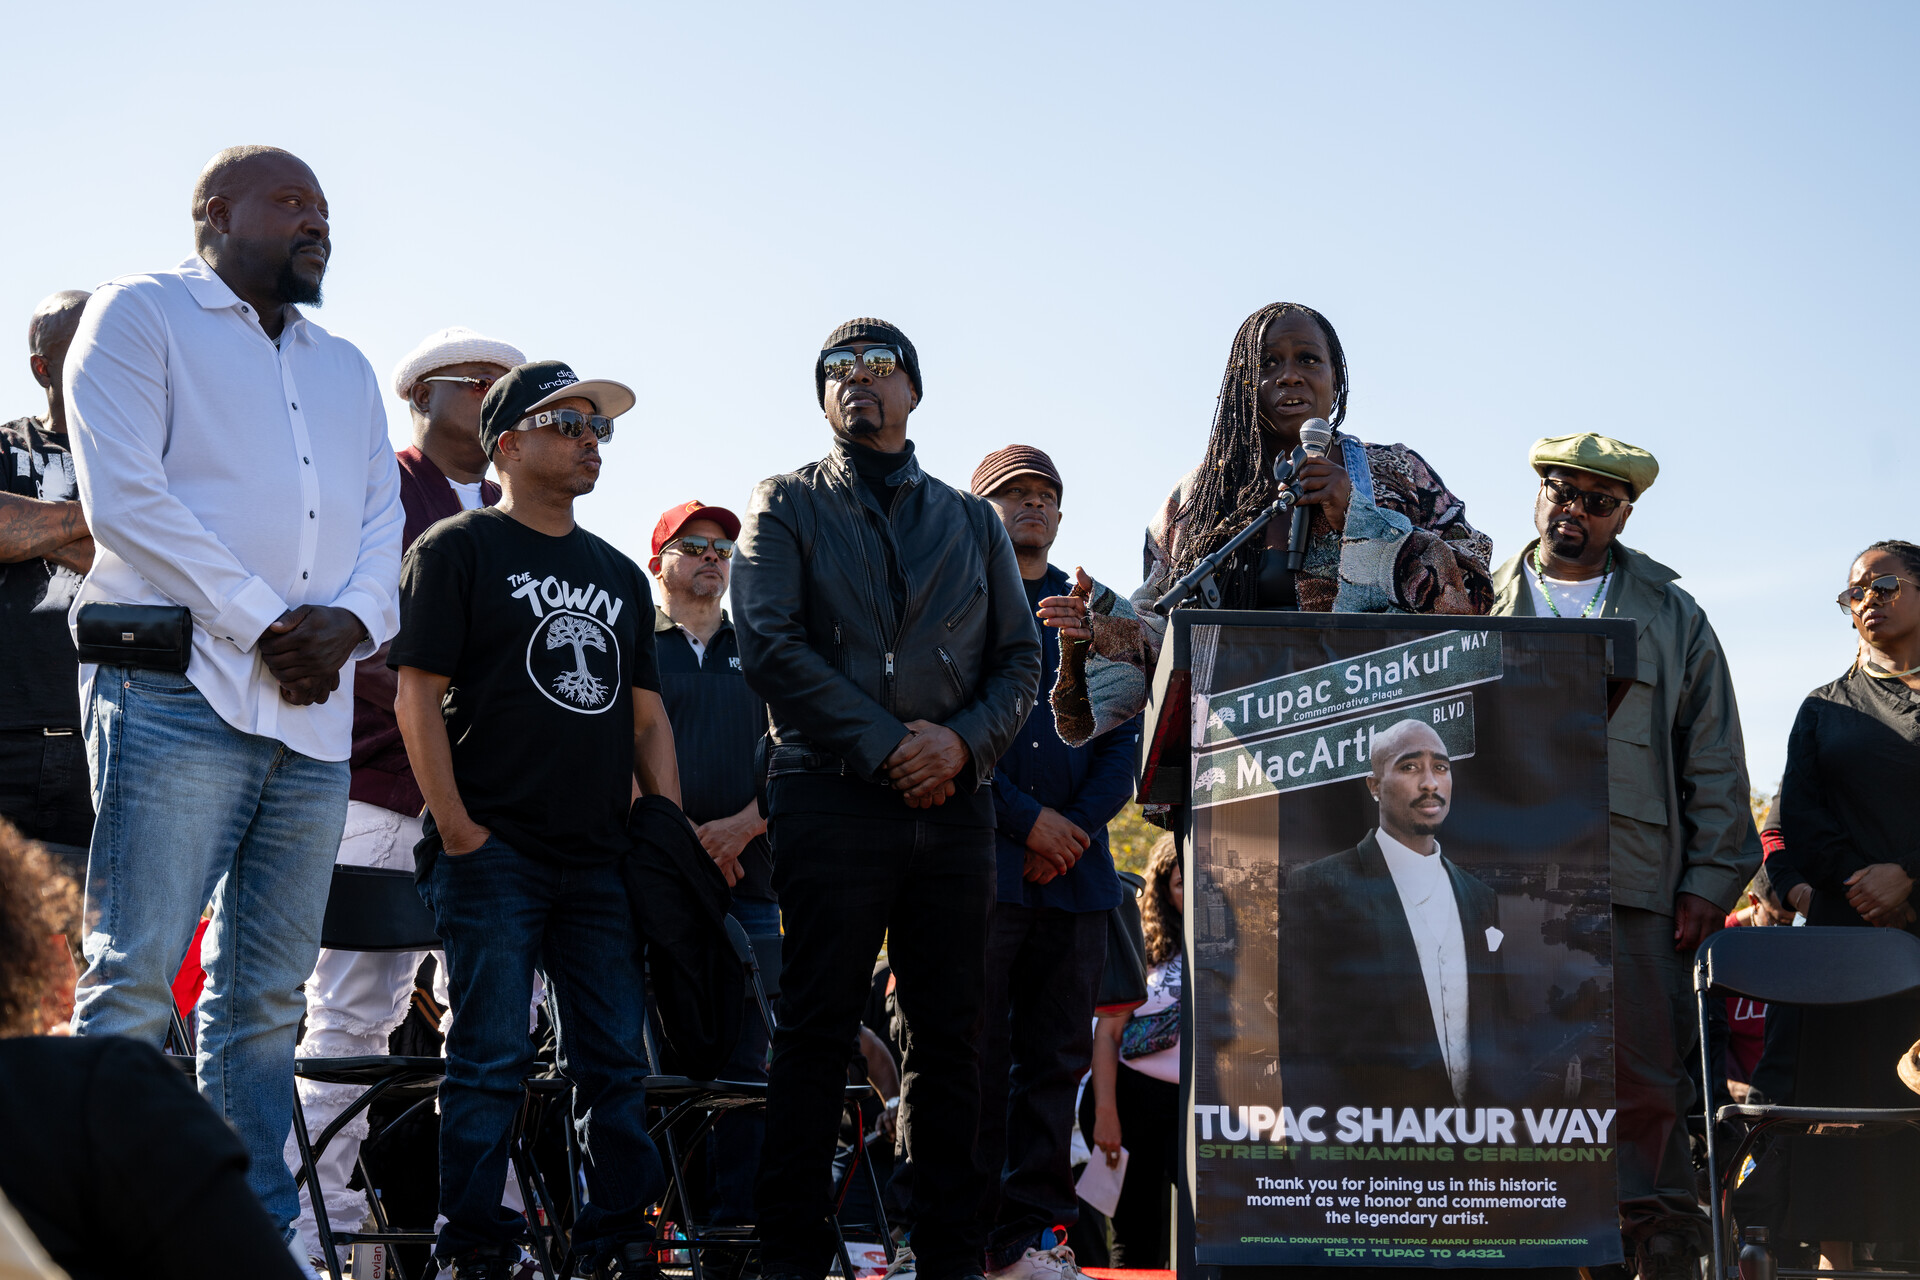 Tupac Shakur Way' Unveiled in Oakland as Rap Icon Gets His Own Street | KQED